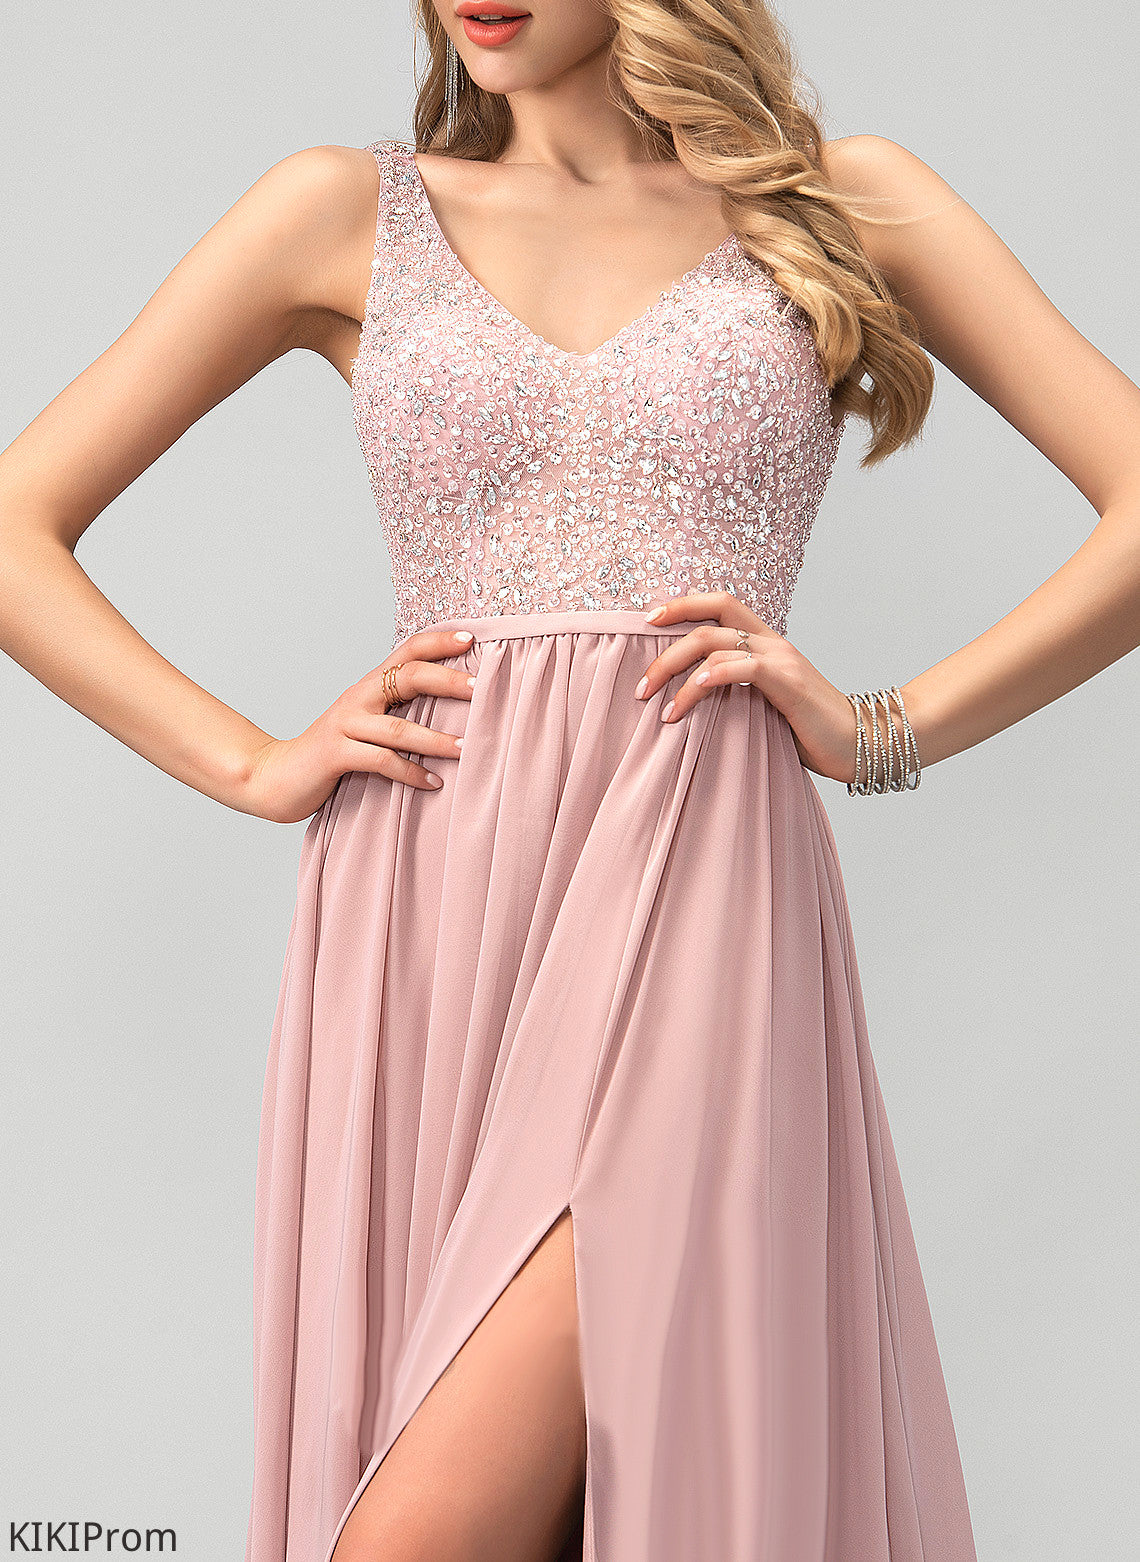 With Floor-Length A-Line Prom Dresses V-neck Beading Chiffon Sequins Haylie